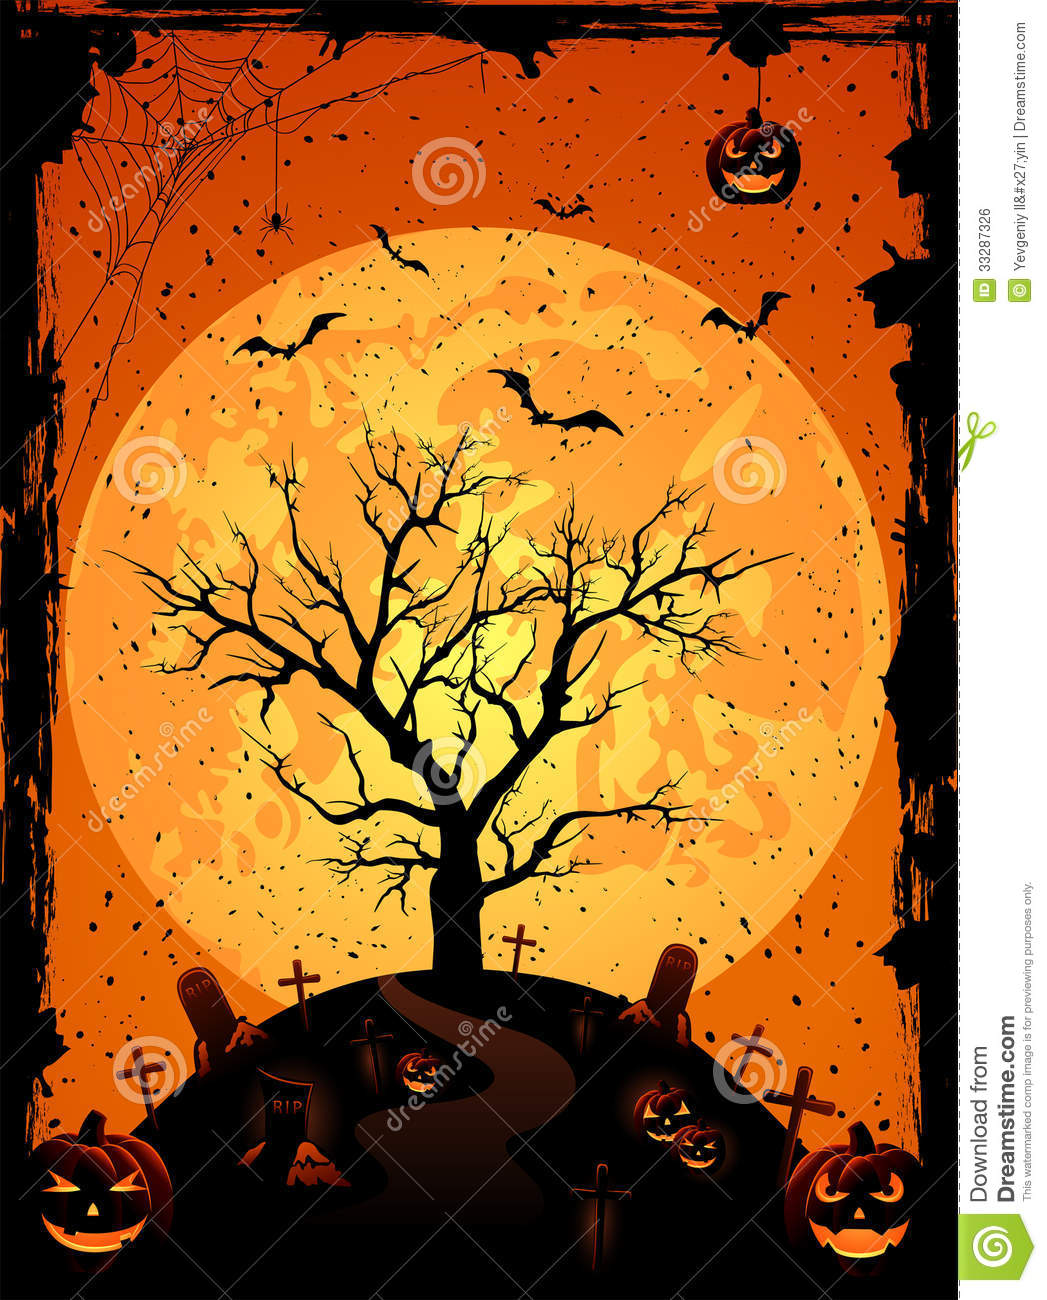 Halloween Background With Tree Royalty Free Stock Image   Image